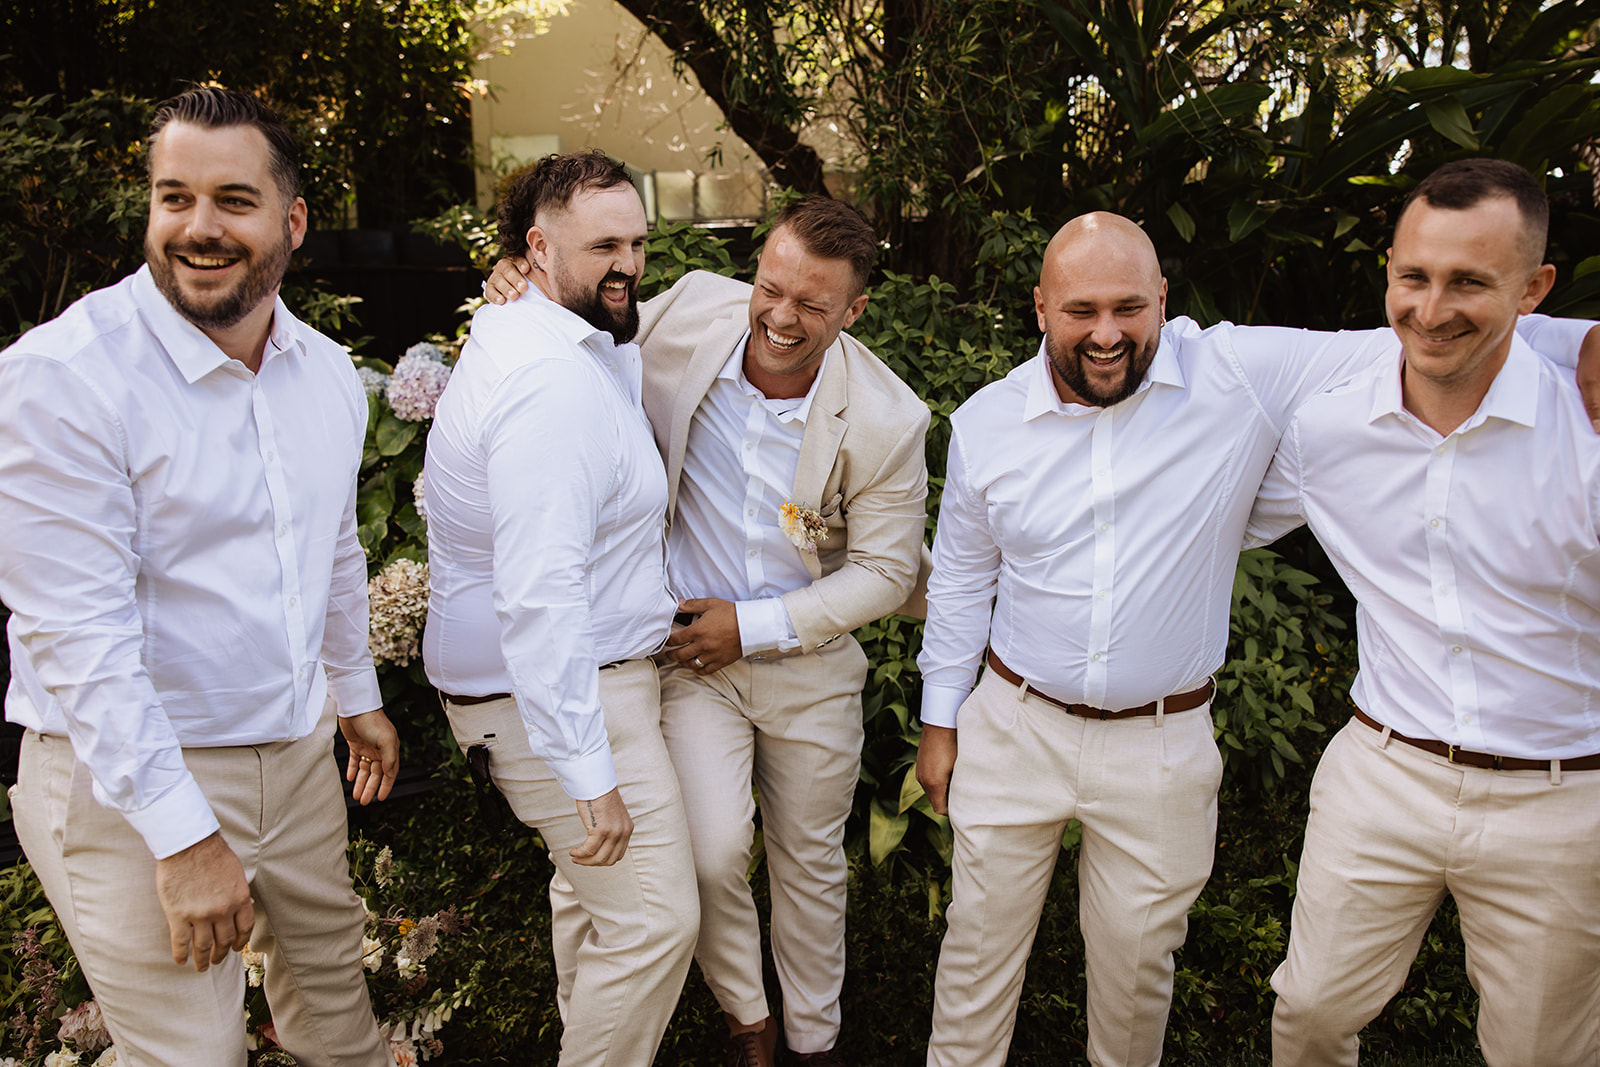 Groom and Groomsmen at the Wedding in Lindesay House, Darling Point New South Wales